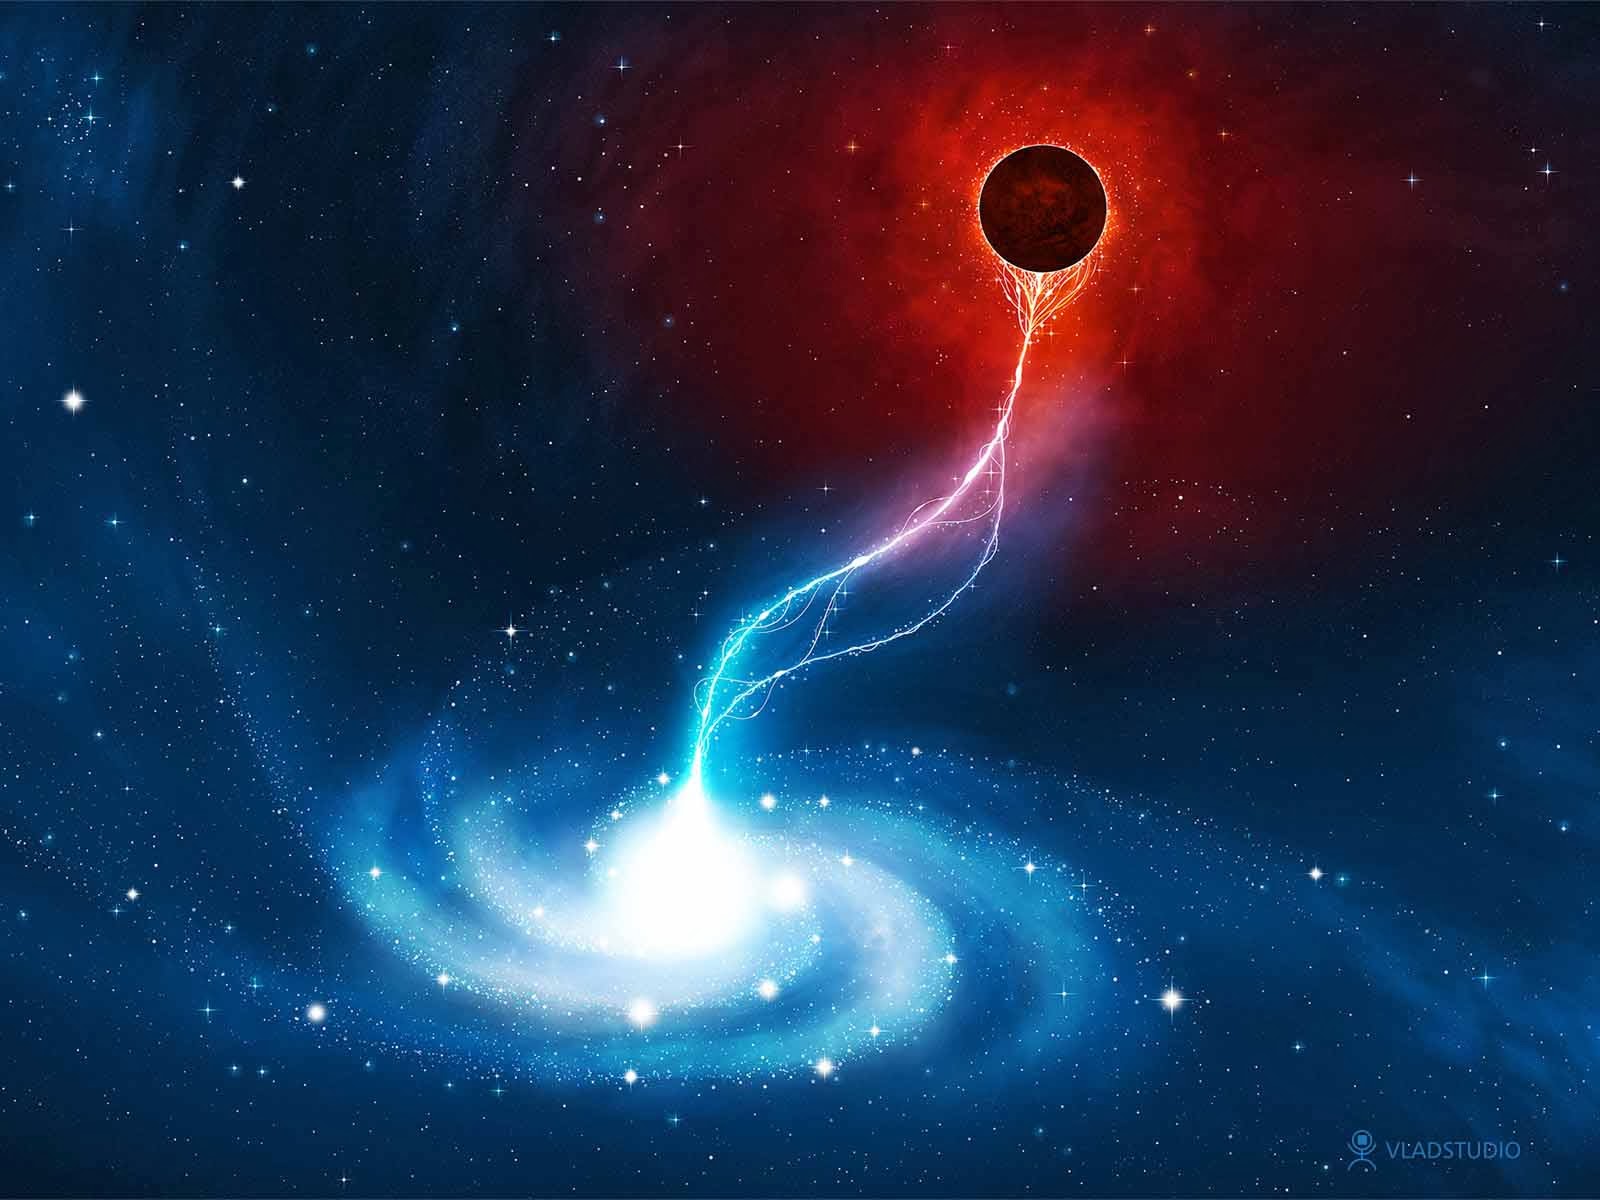 Terriod Black Hole Wallpapers Images, Photos, Reviews